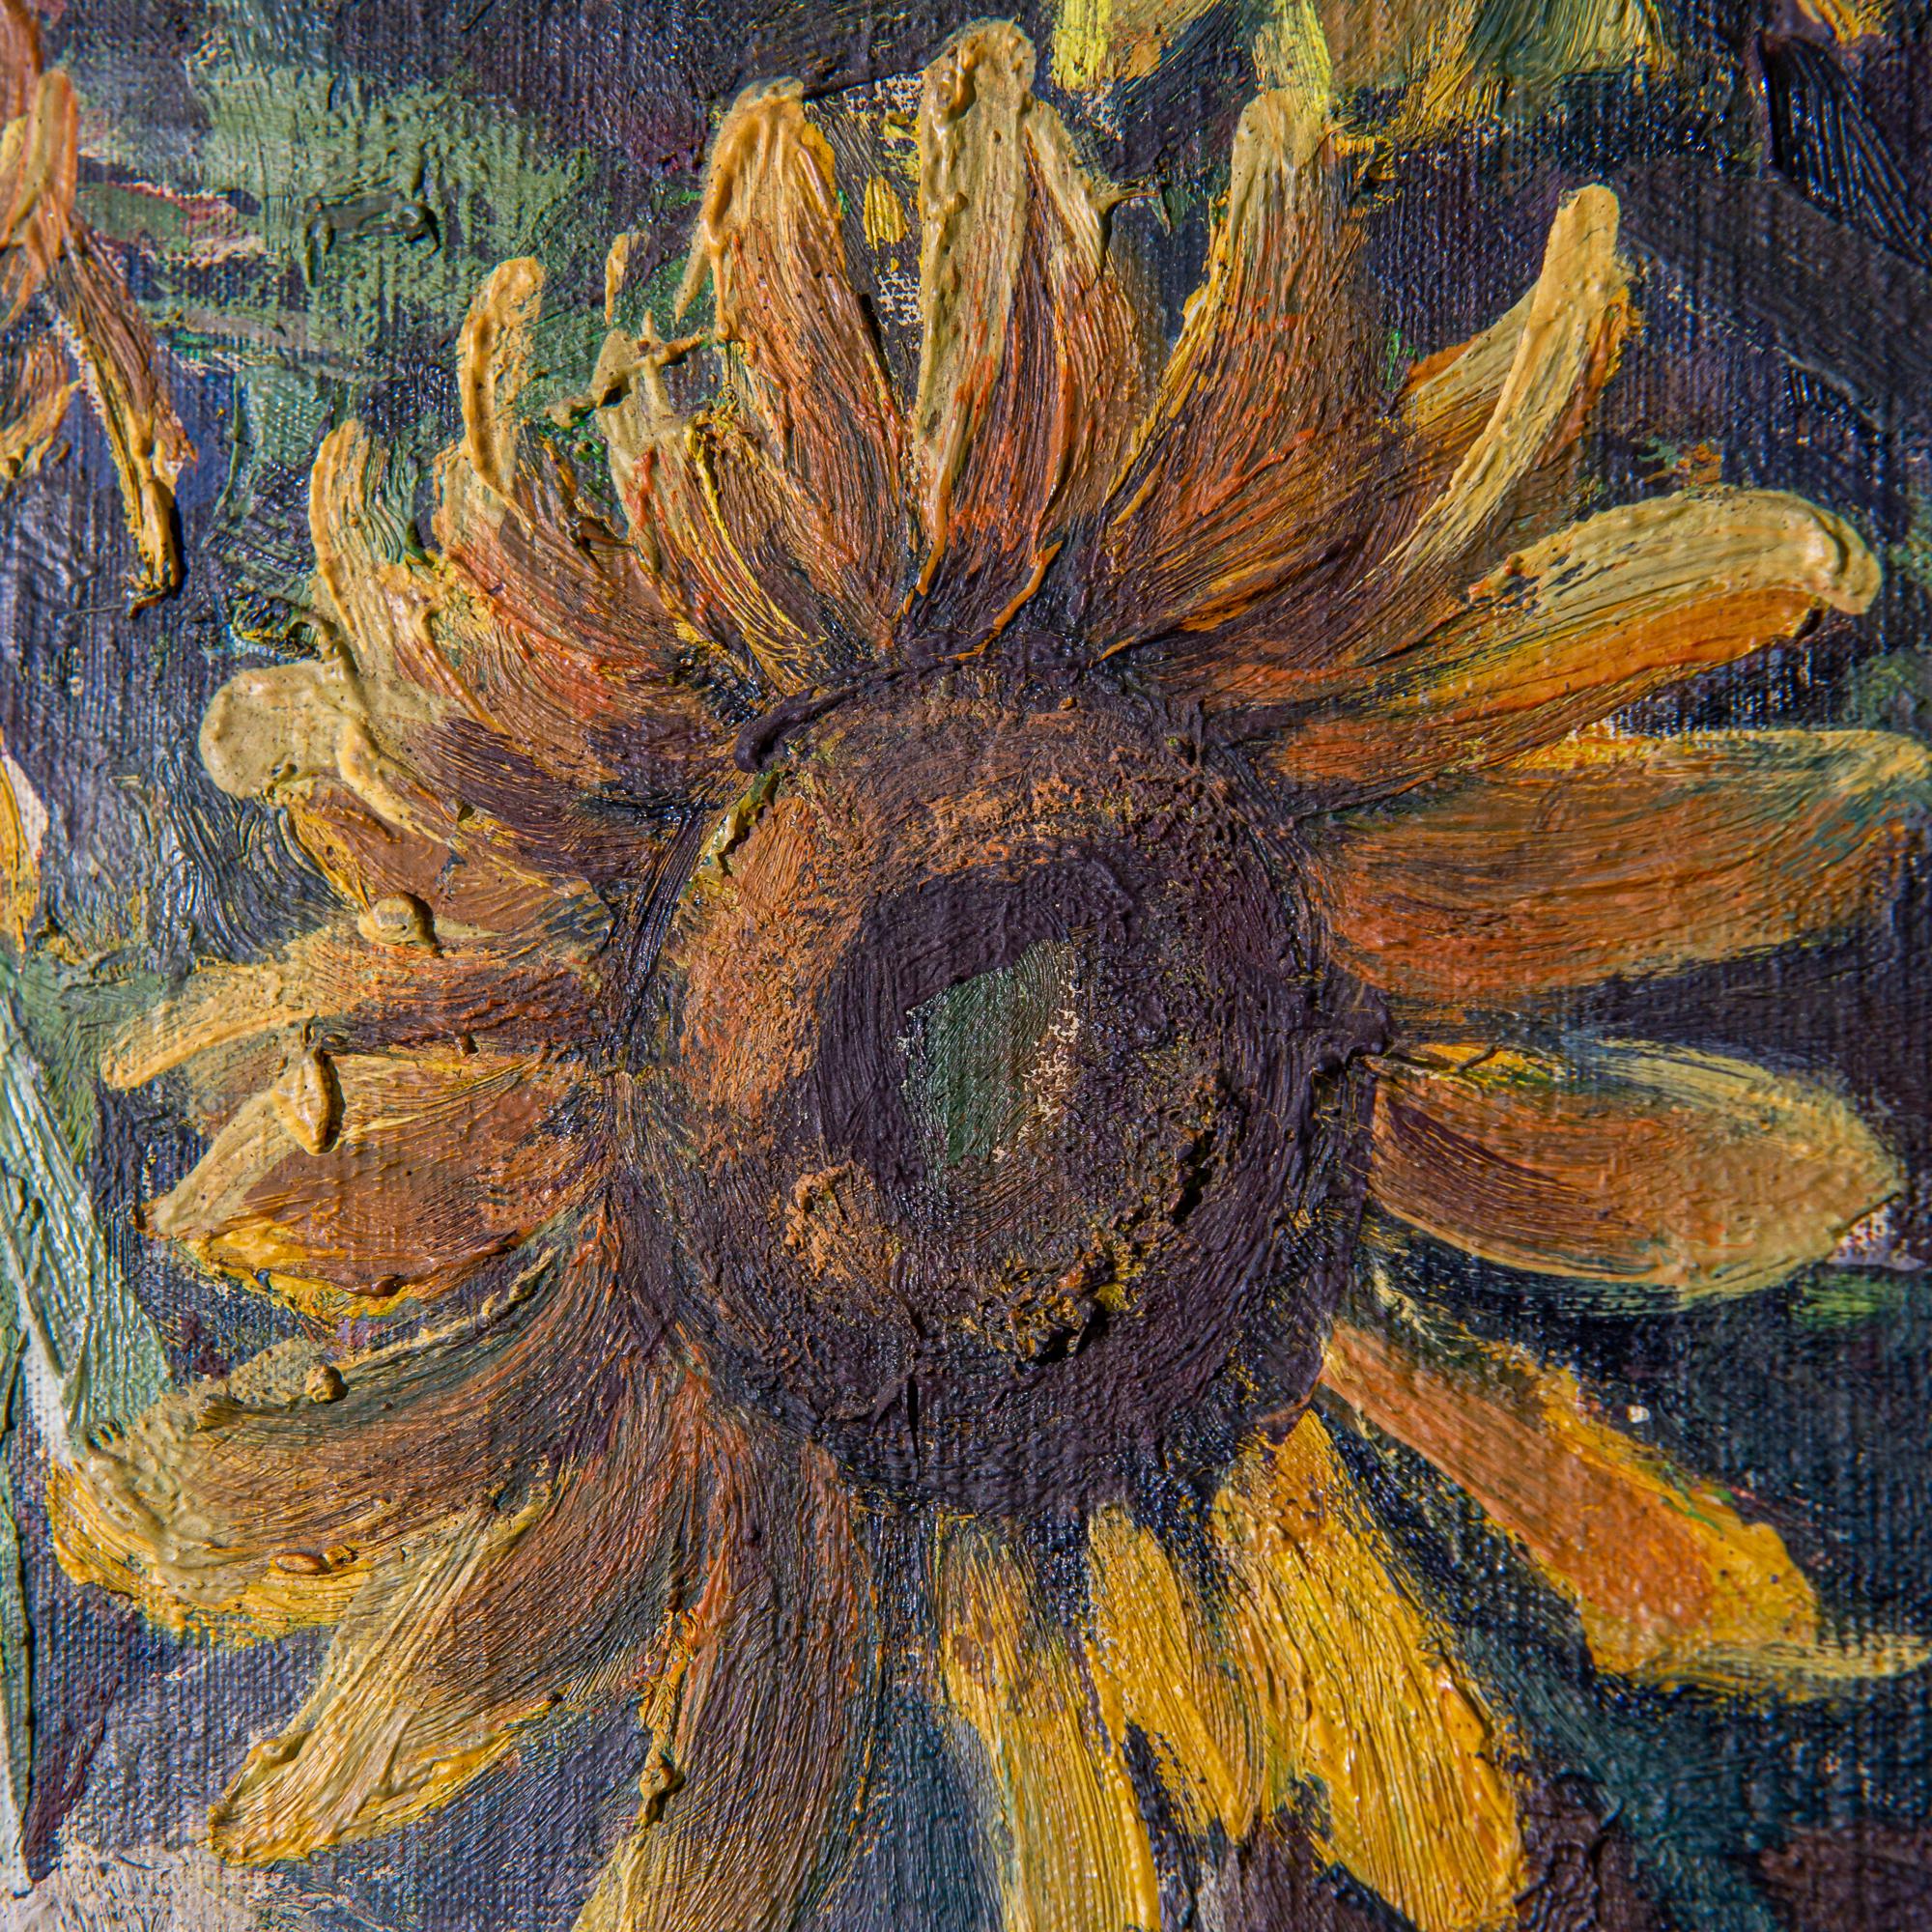 20th Century Czech Still Life Painting with Sunflowers 1